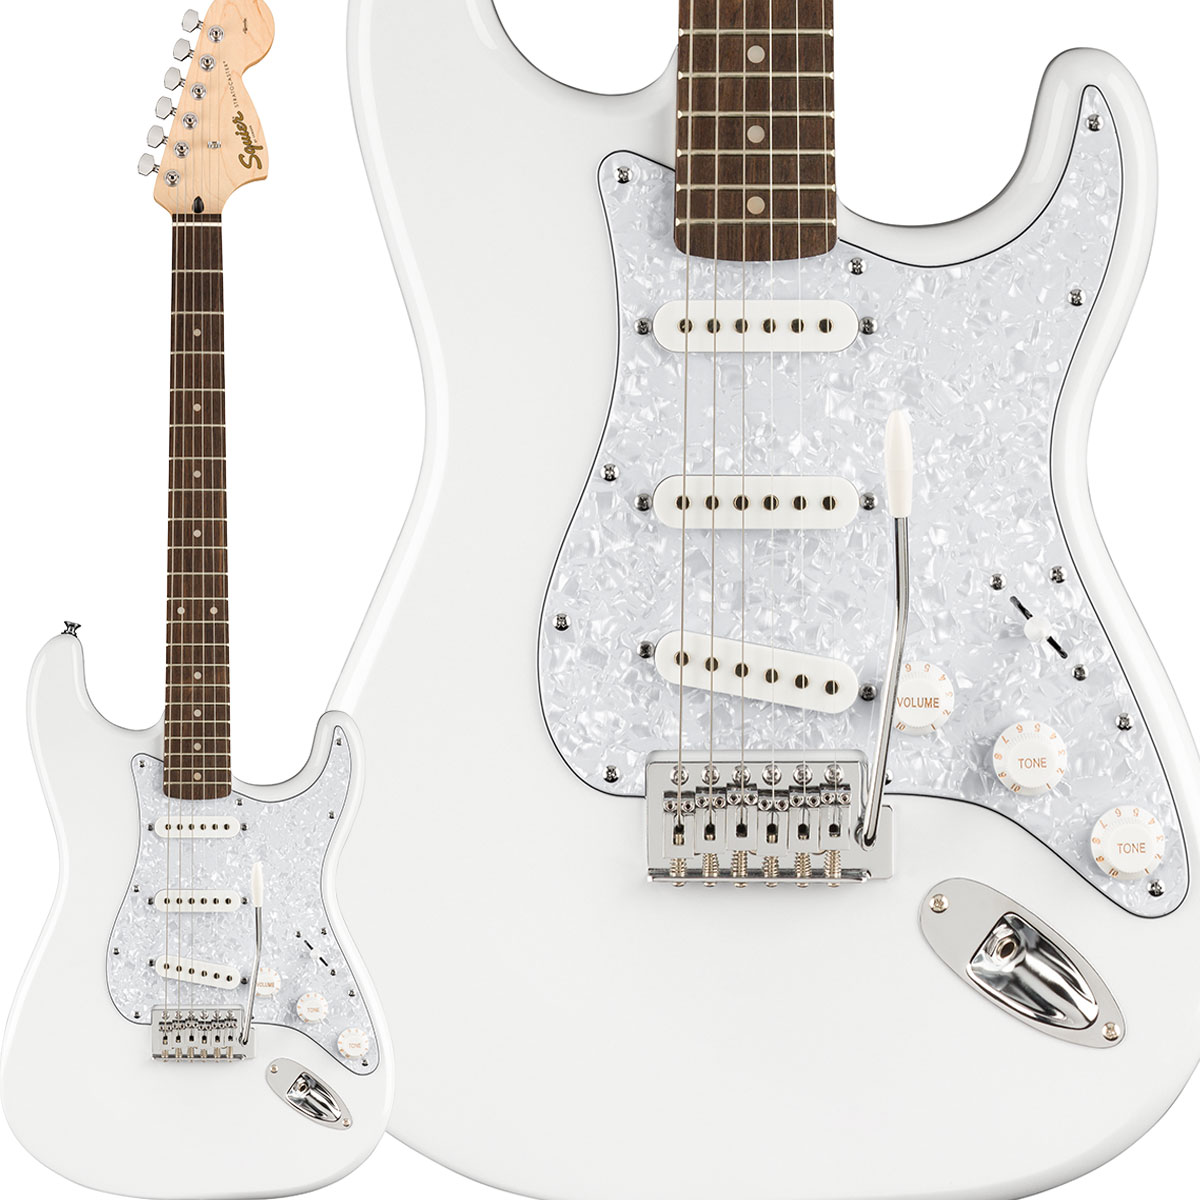 Squier Affinity stratocaster 島村楽器限定モデル-connectedremag.com